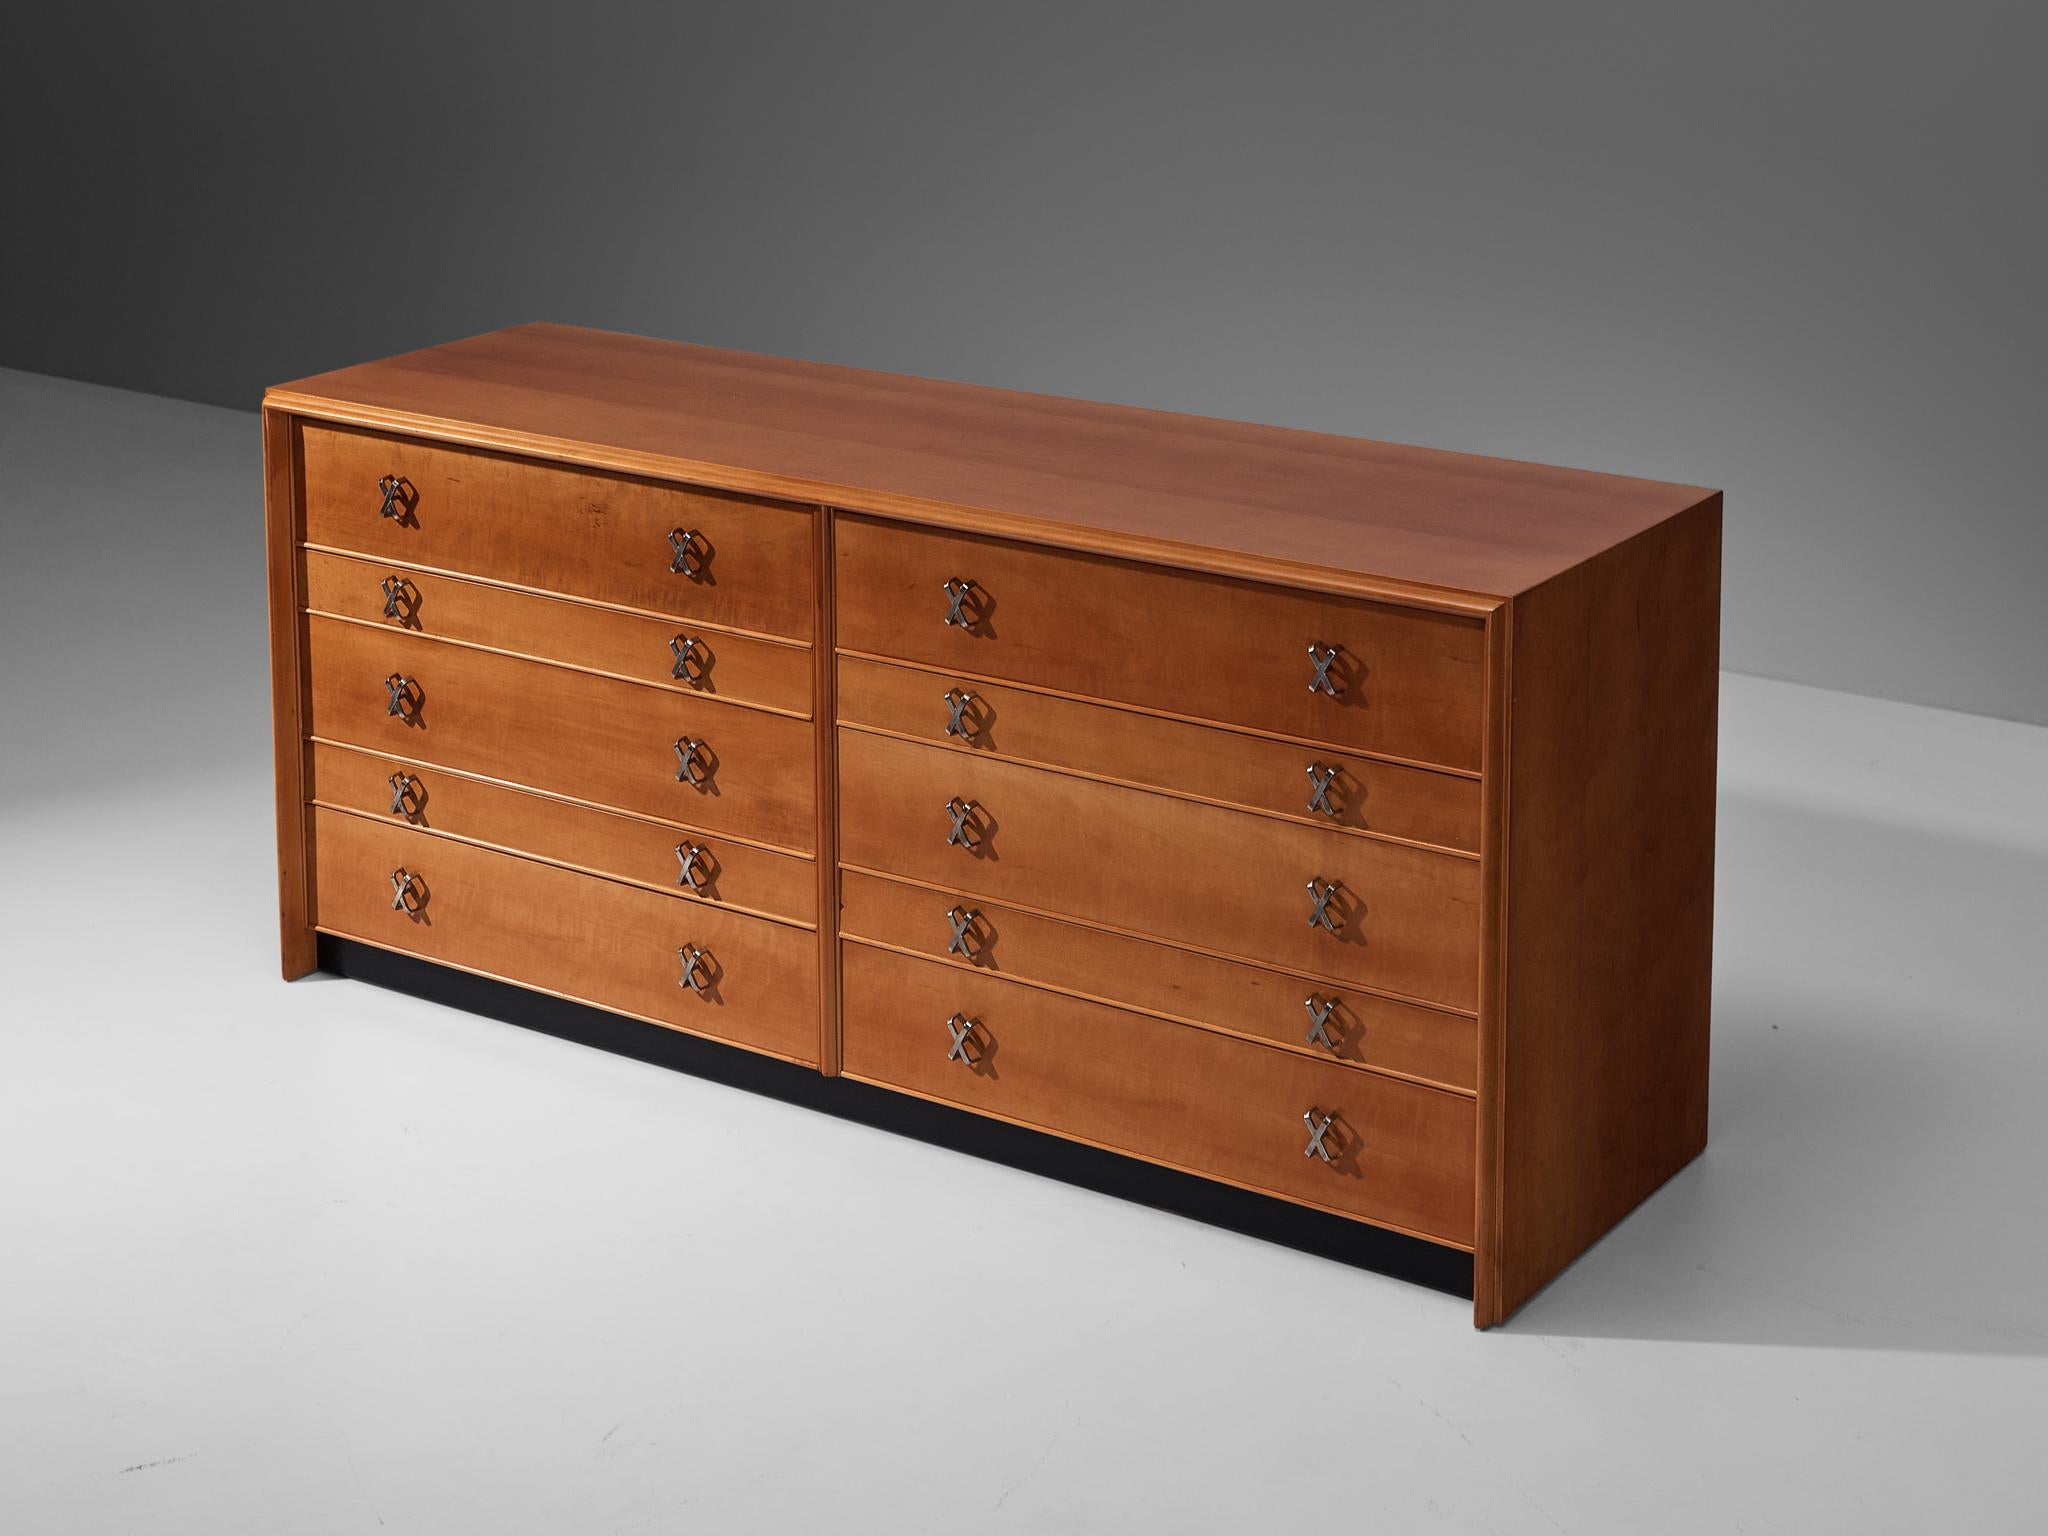 Paul T. Frankl for Johnson Furniture Company, 'Emissary' chest of drawers, cherry, nickel-plated brass, United States, 1960s

This double dresser is part of the 'Emissary' series designed by Austrian furniture designer and architect Paul T. Frankl